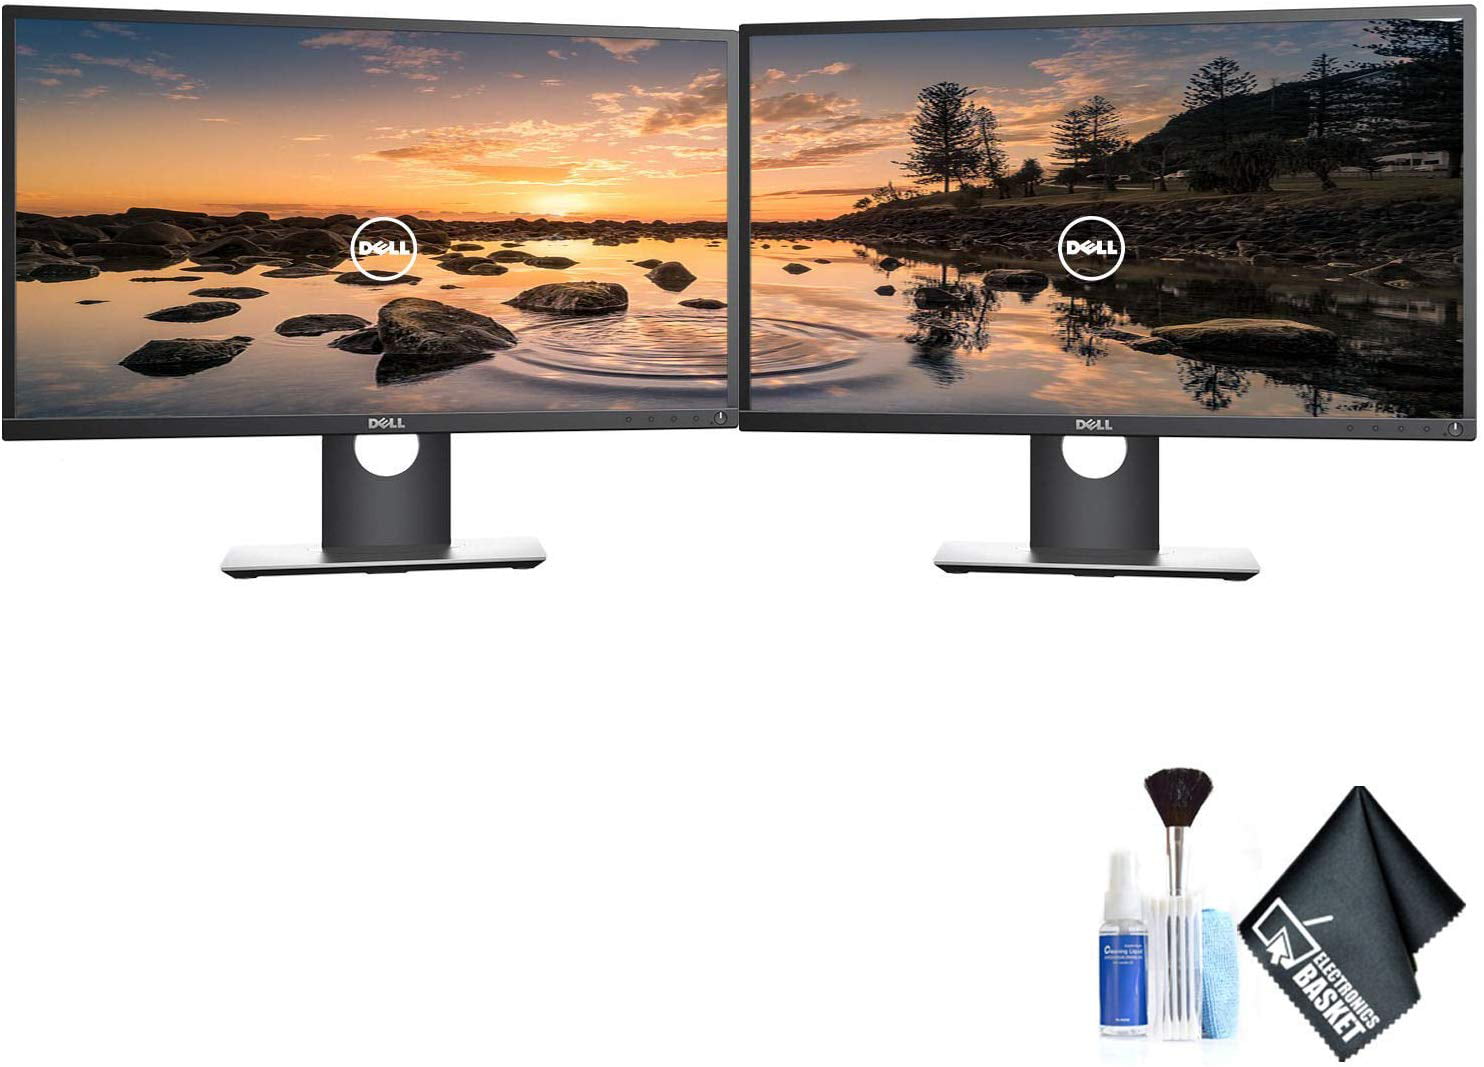 Dell P2417H 23.8" 169 IPS Dual Monitor Set with Deluxe